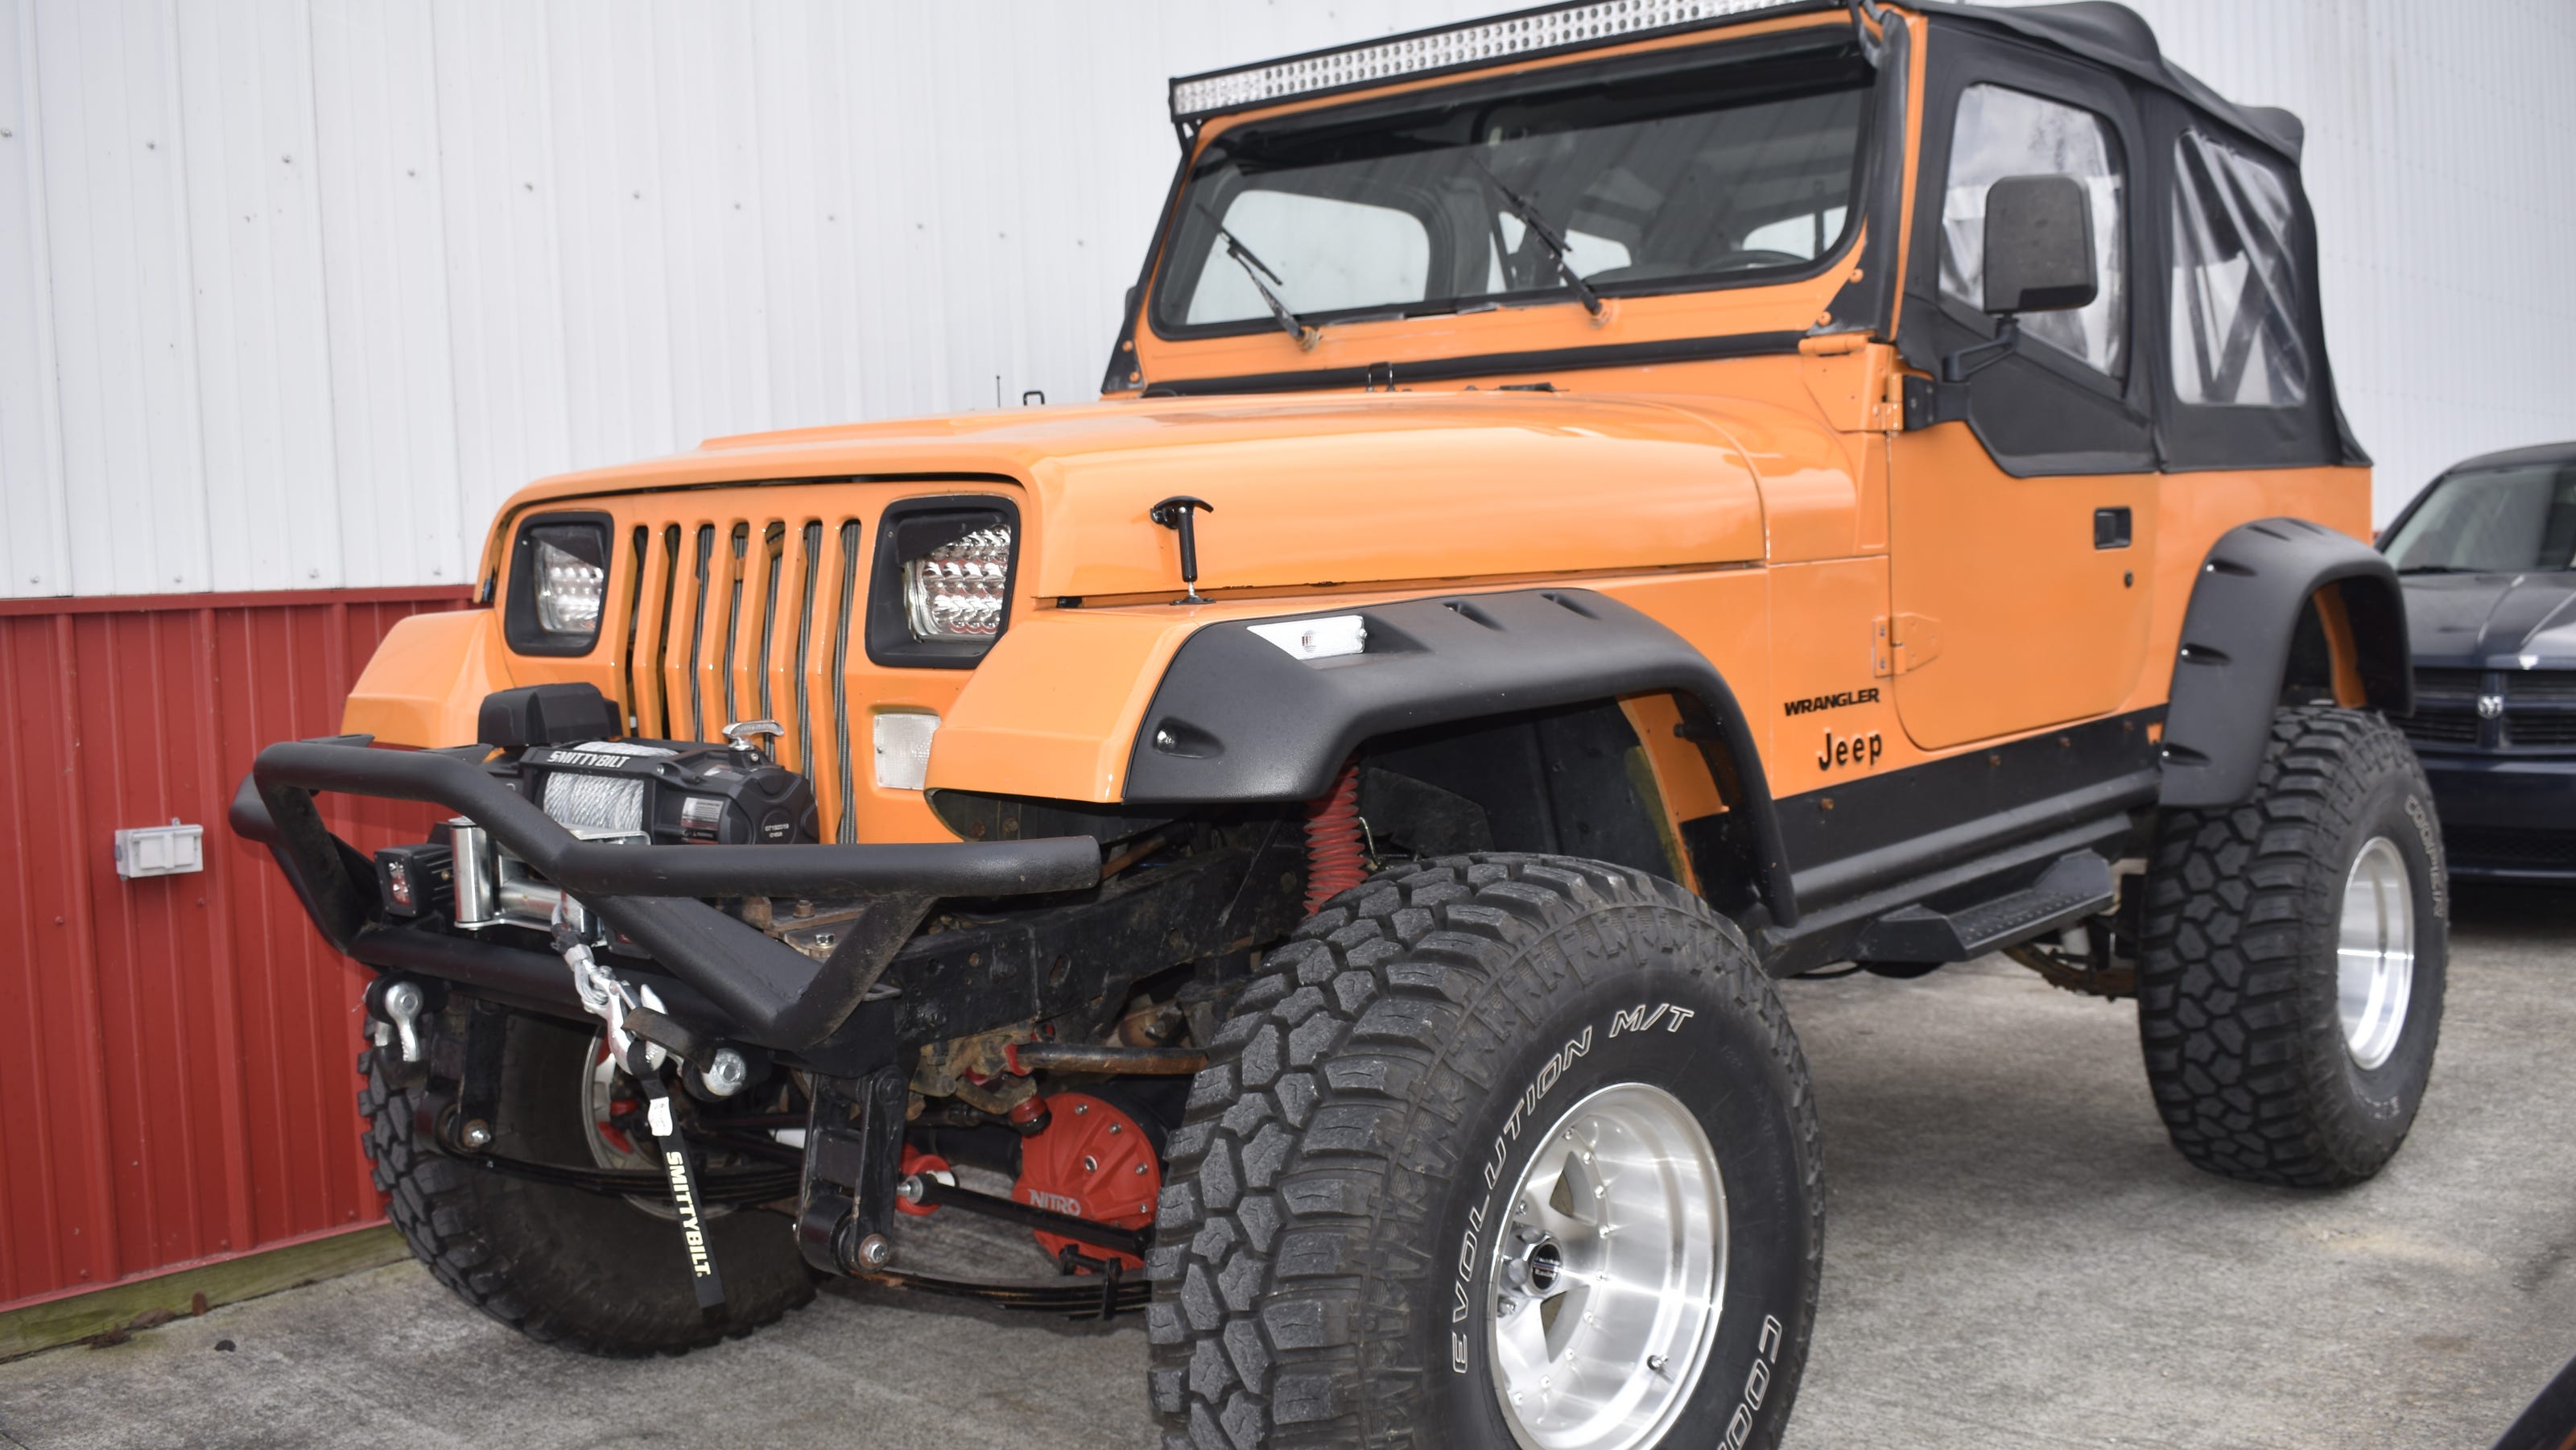 Bloomington man rebuilds 1991 Jeep Wrangler from the frame up